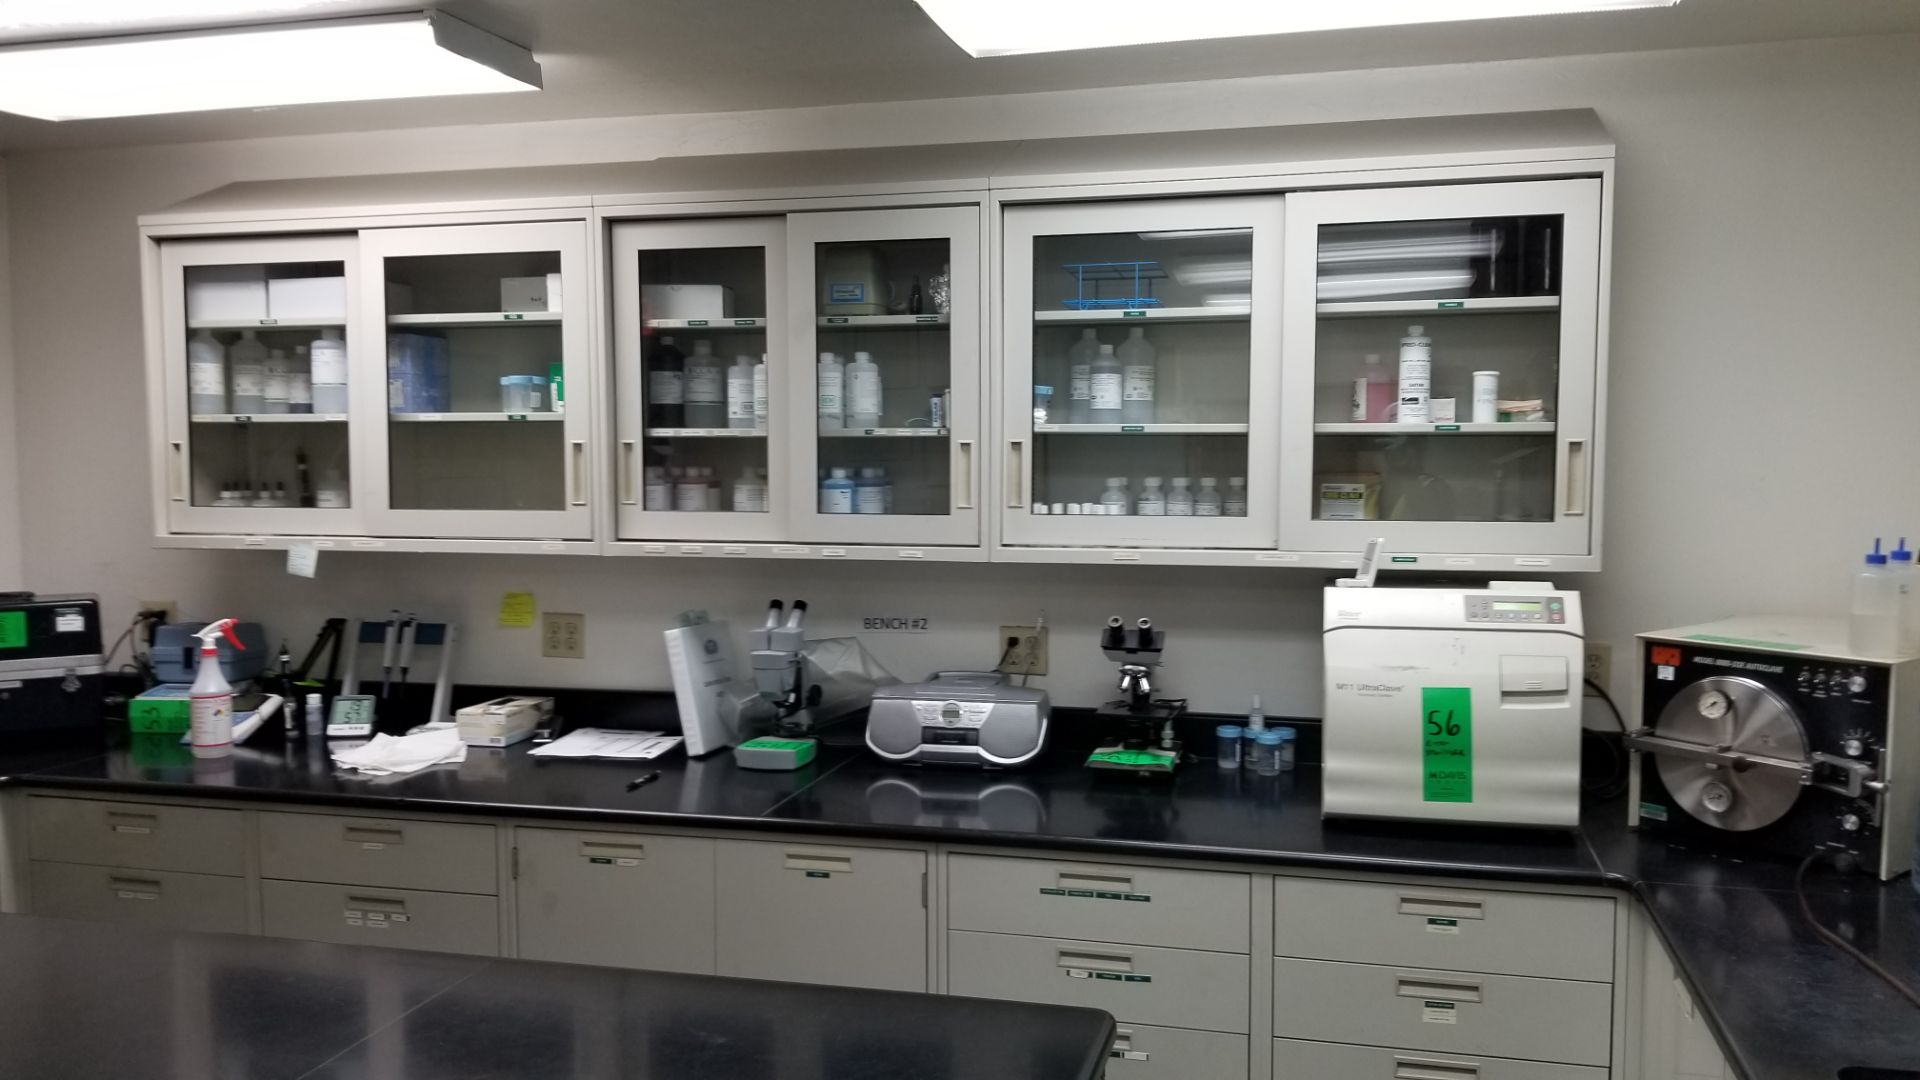 Lab Counters and Cabinets including Sink, Center Cabinet and Wall Units with Sliding Glass Doors - Image 2 of 3